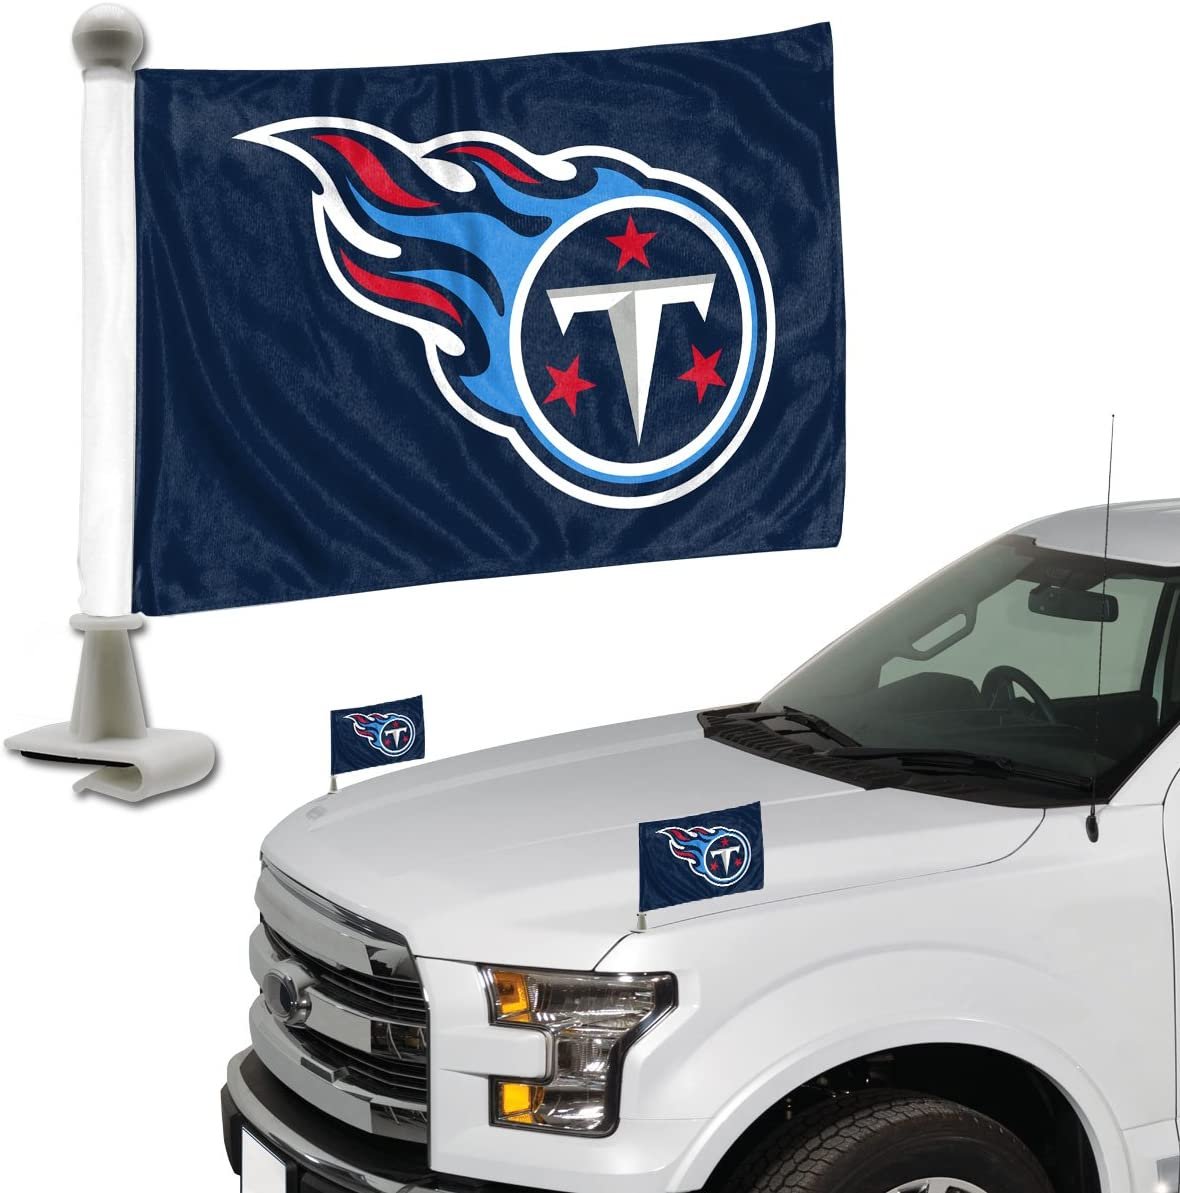 FANMATS ProMark NFL Tennessee Titans Flag Set 2-Piece Ambassador Style, Team Color, One Size